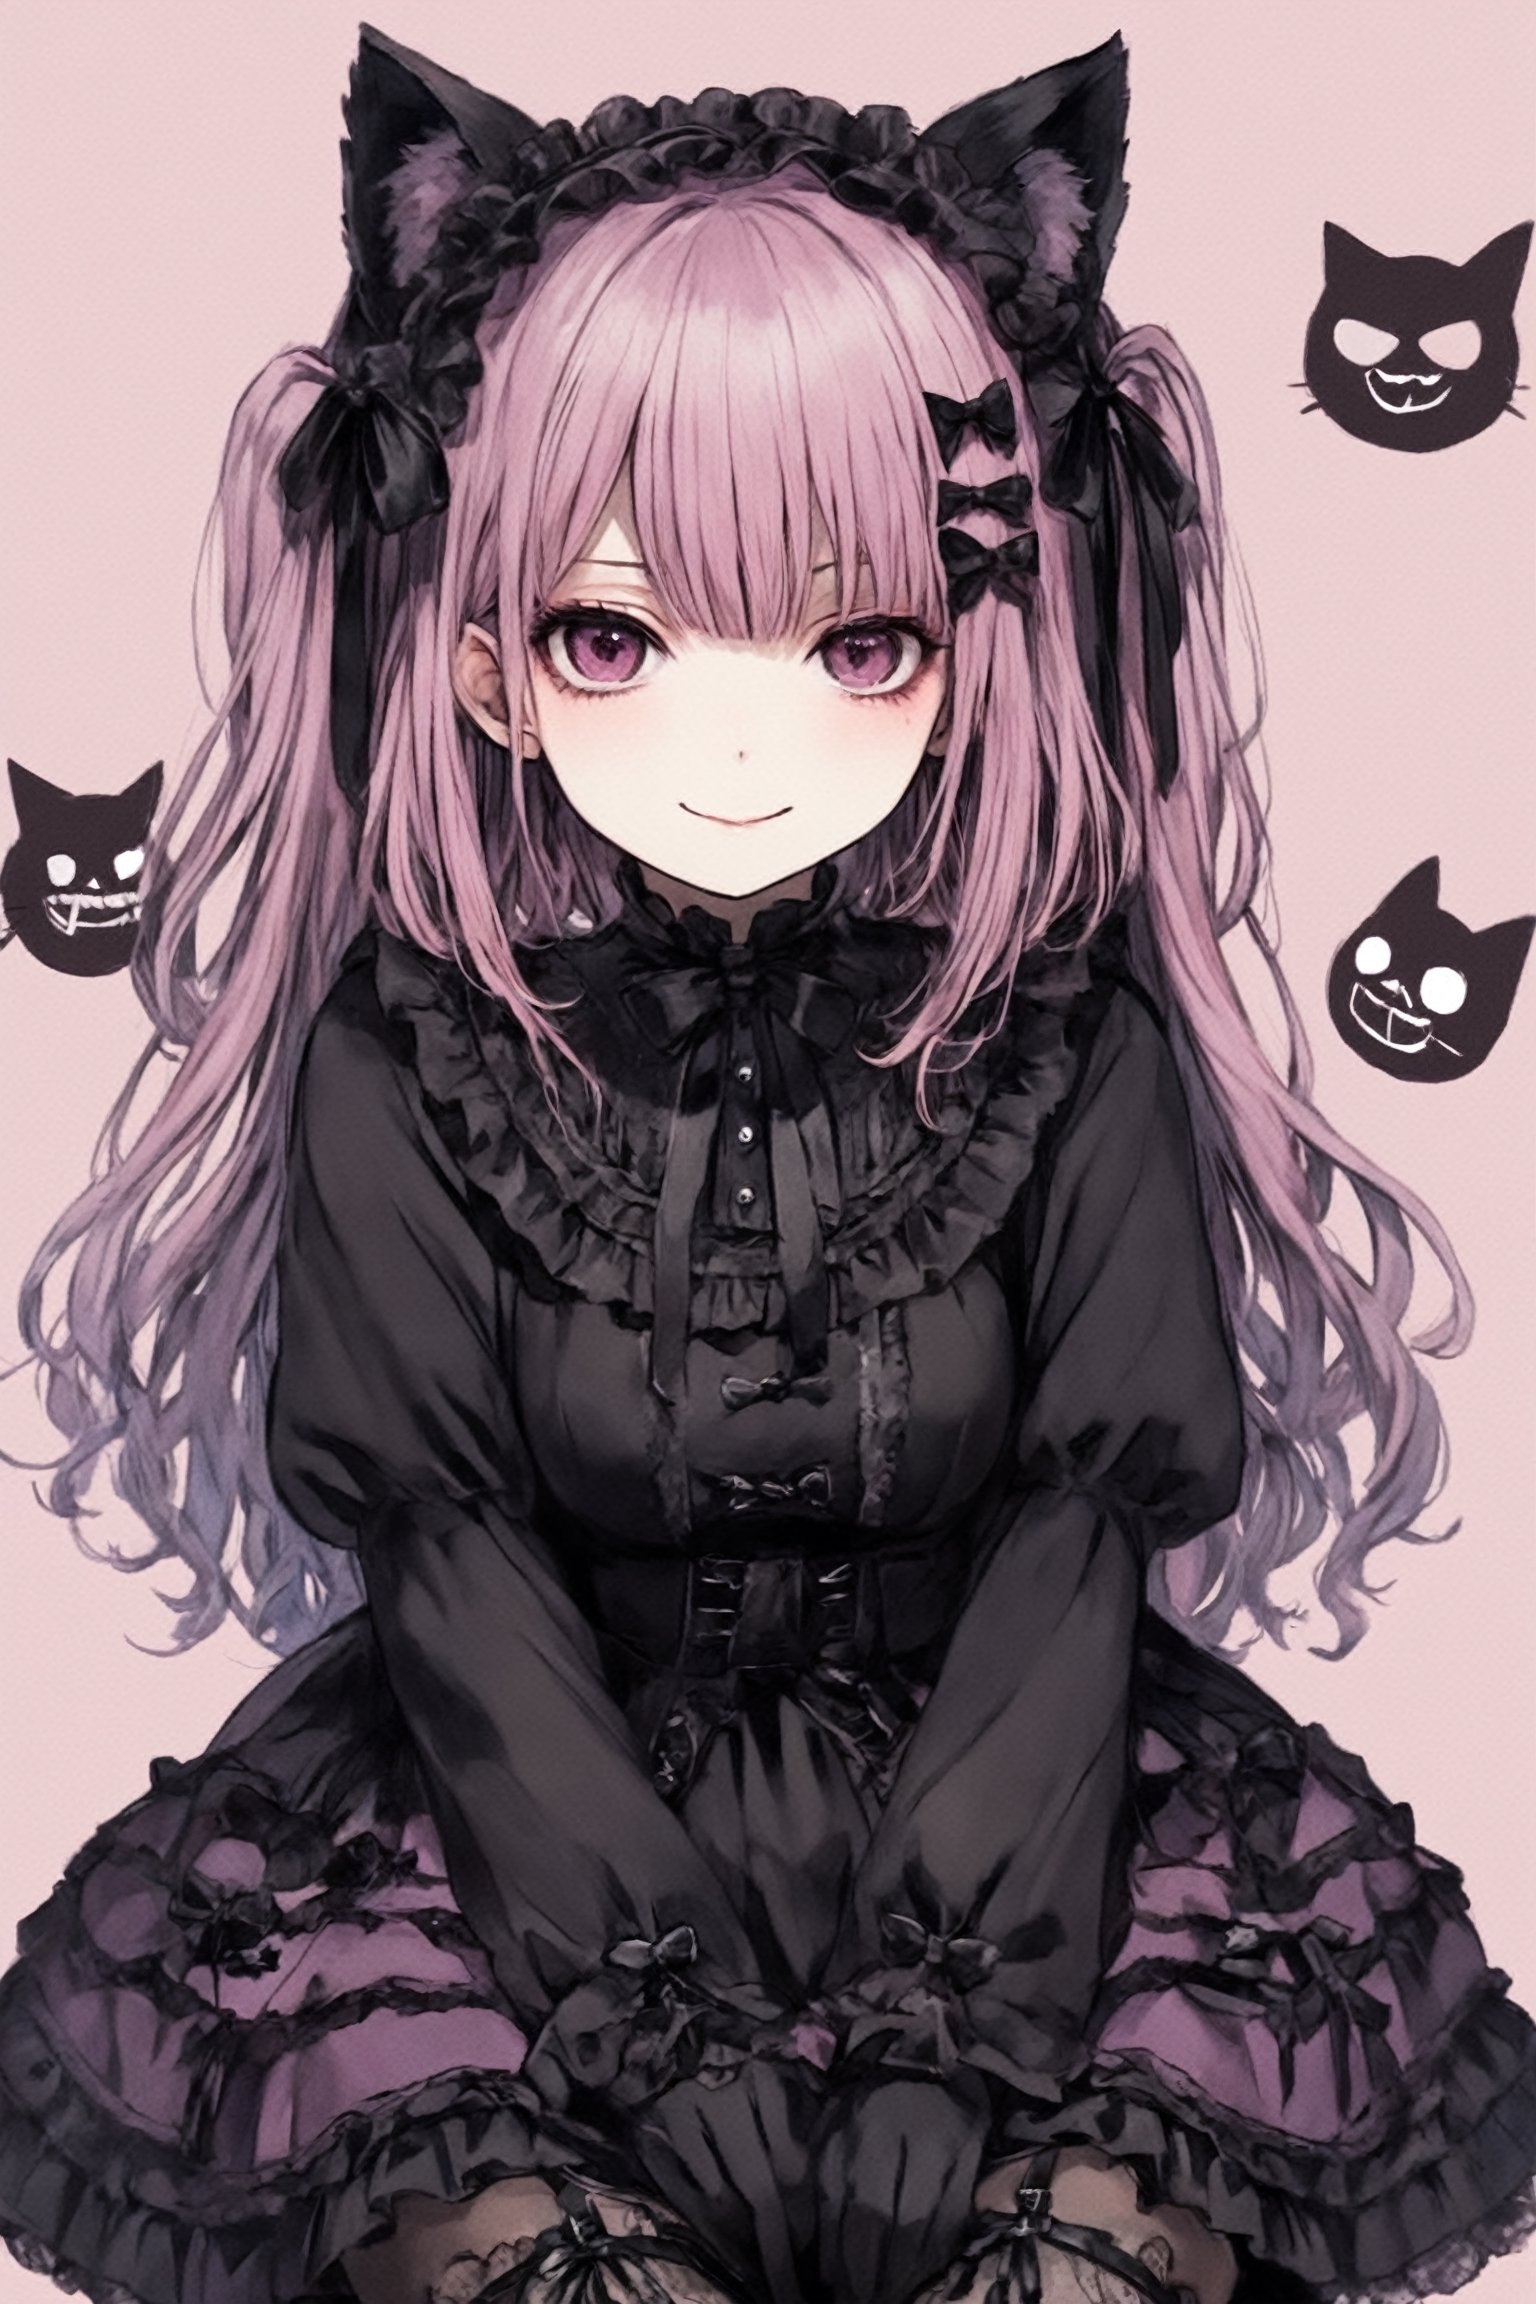 JIRAI-KEI,goth,wicked smile,rounded eyebrows,
Catsuit with cat ears with Lolita impression,Goth makeup,
Long twin-tail hair,CROSS ACCESSORY,Clothes with pink ruffled lace,
Garter belts, thick-soled boots,dal,rem \(re_zero\)